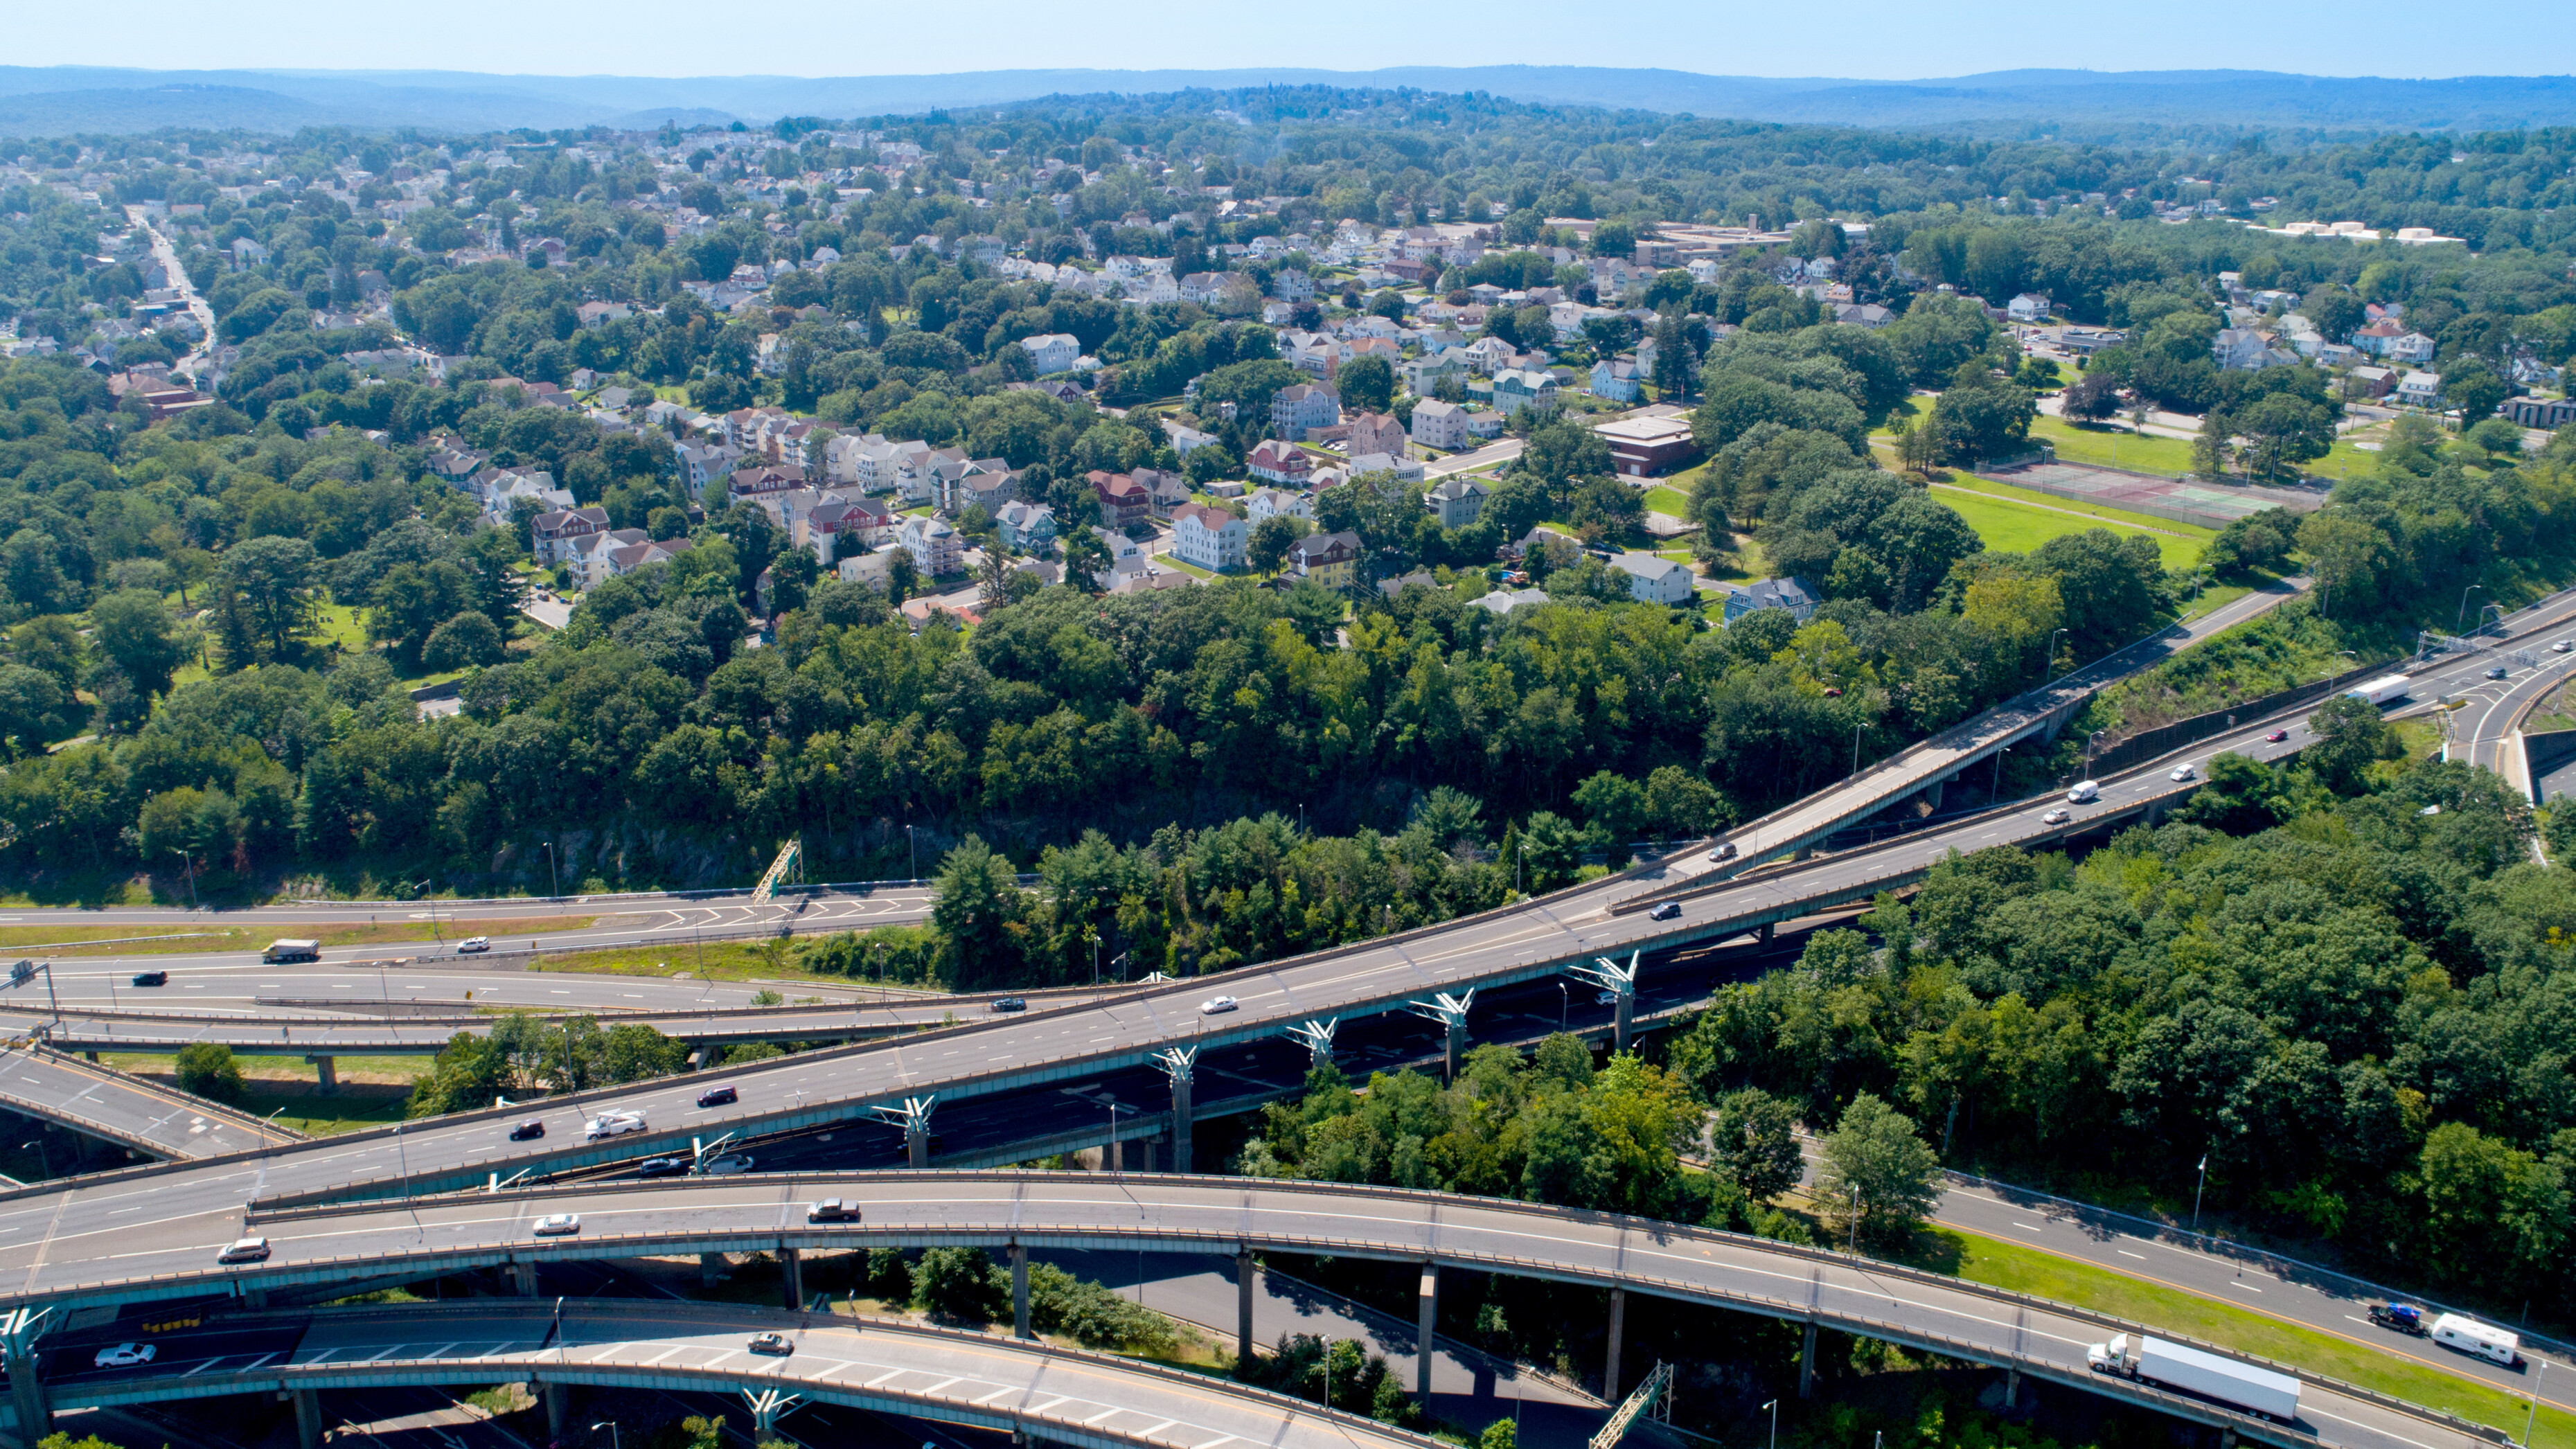 Aerial view of I-84 highway, Route 8 and the City of Waterbury.